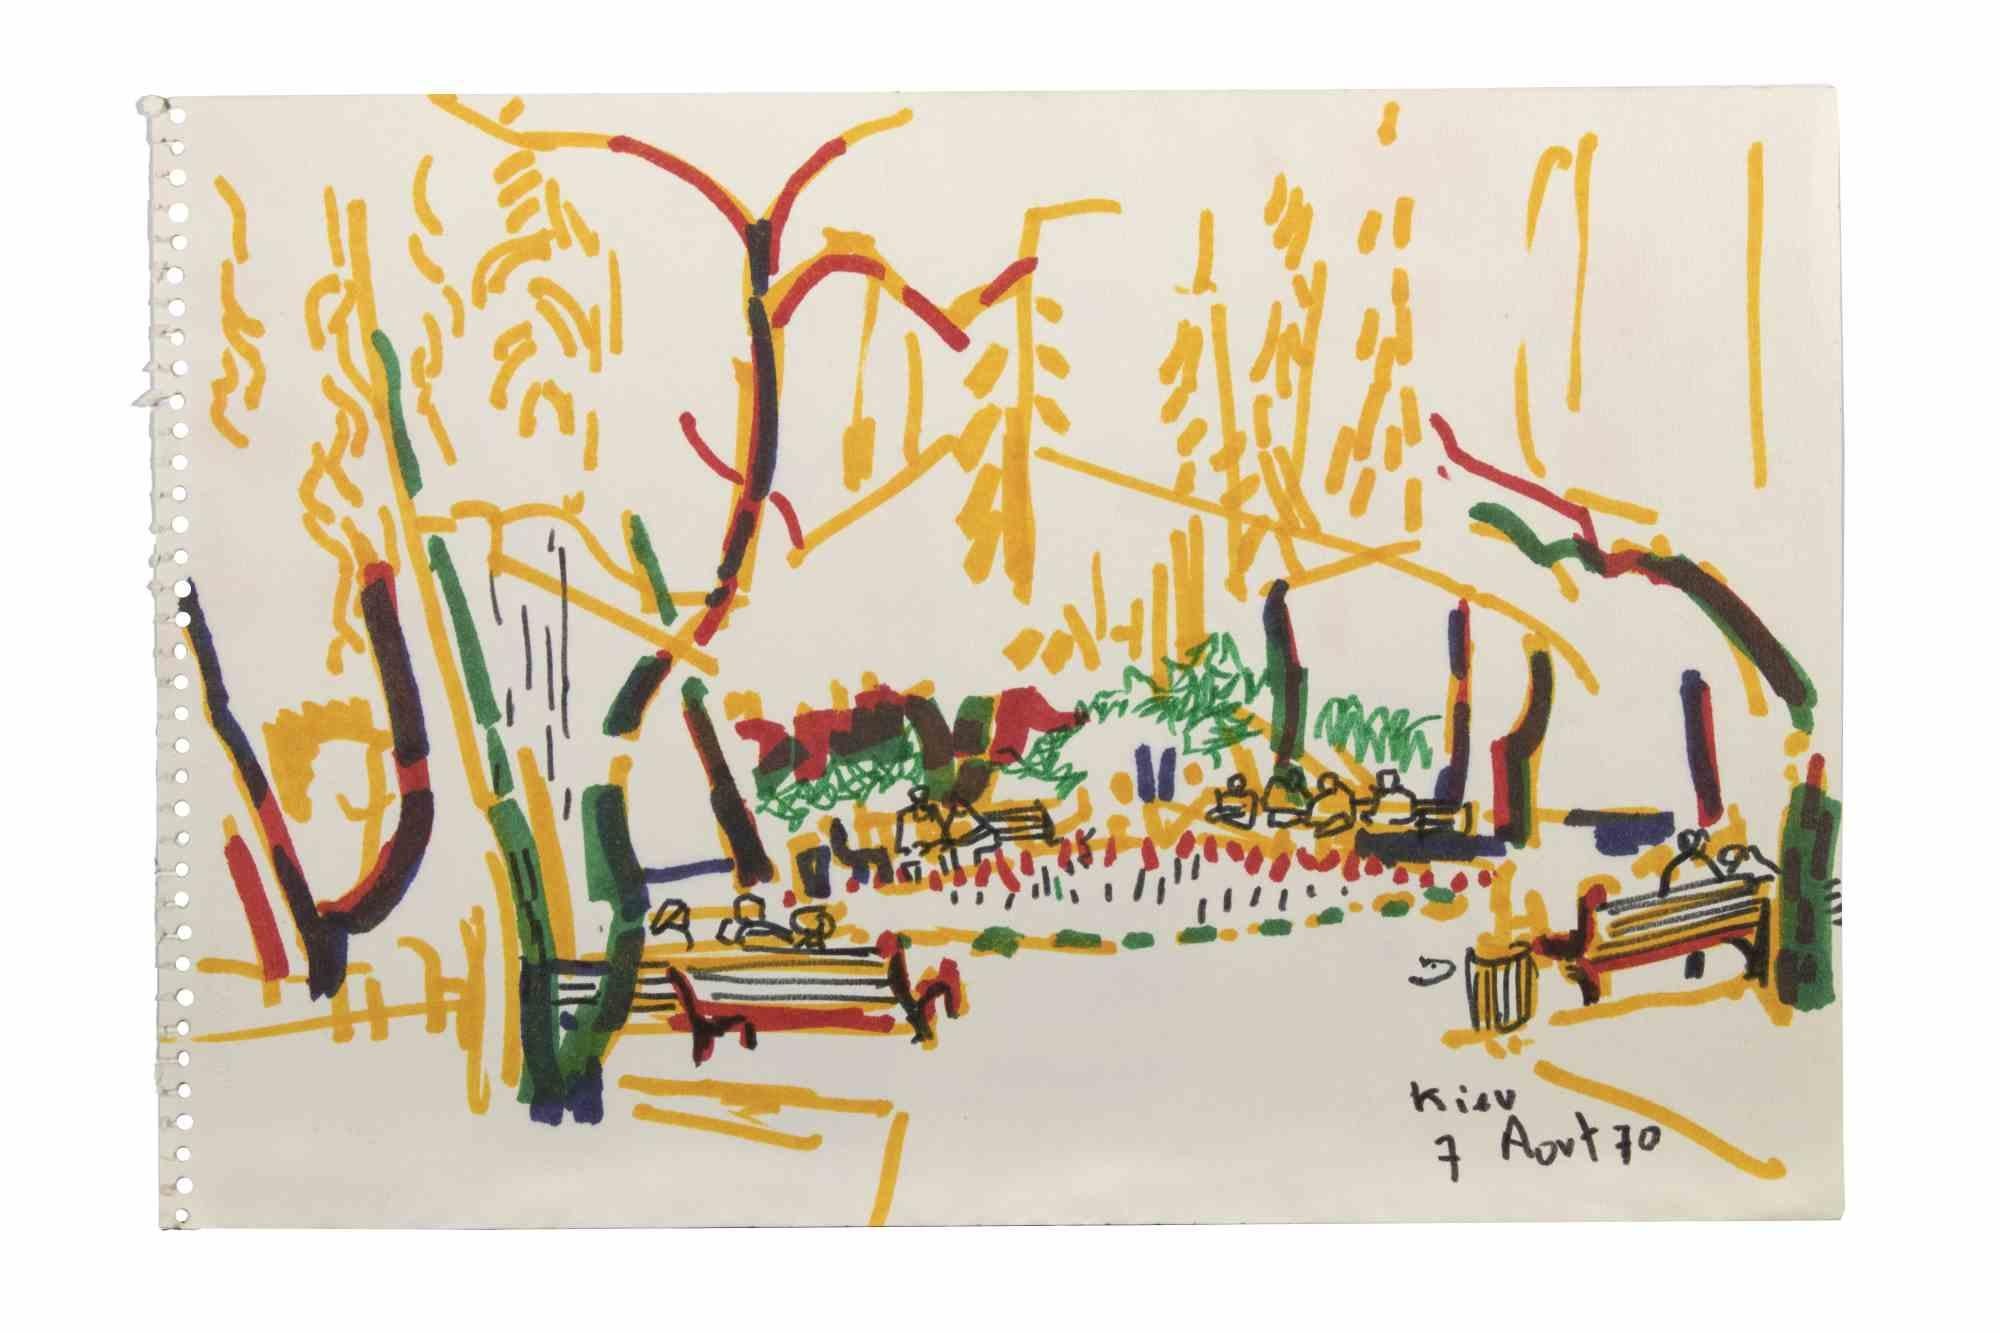 Kiev is a Watercolour and Color Marker Drawing realized by  Reynold Arnould  (Le Havre 1919 - Parigi 1980).

Good condition and vivid colors on a sheet of a notebook.

No Signature, titled and dated on the lower right corner.

Reynold Arnould was